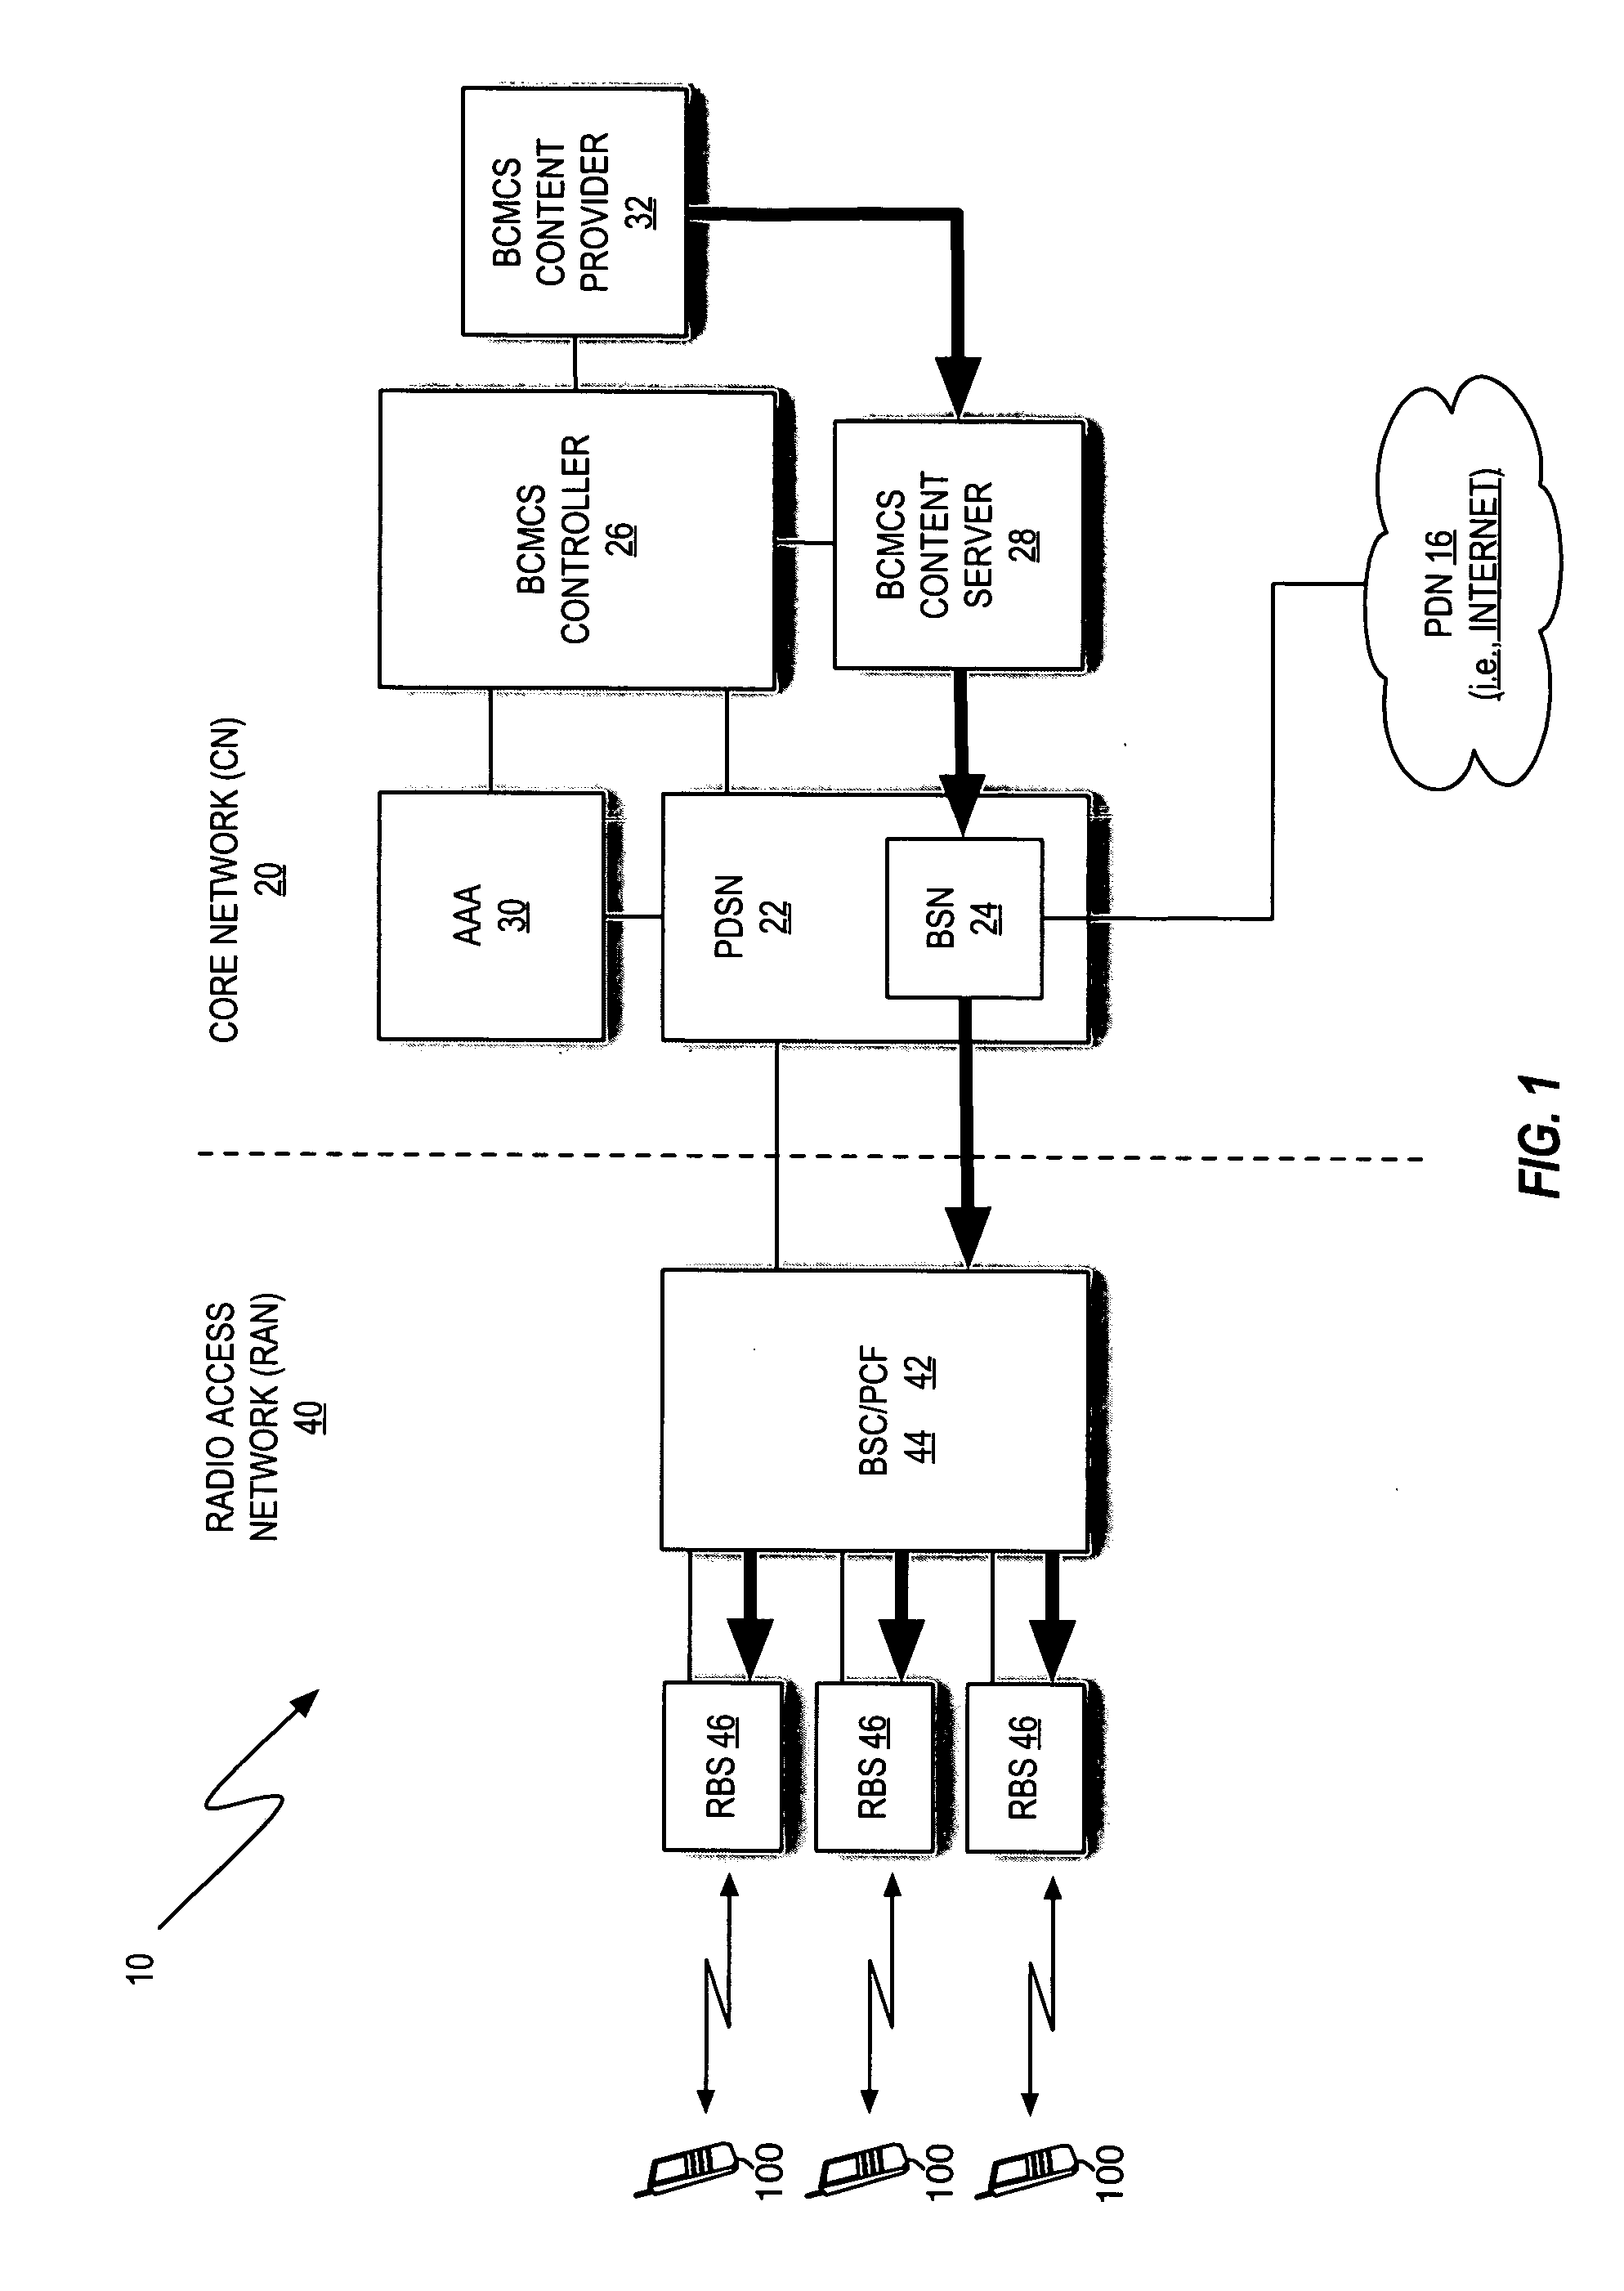 In-band signaling within broadcast stream and support for mixed flows